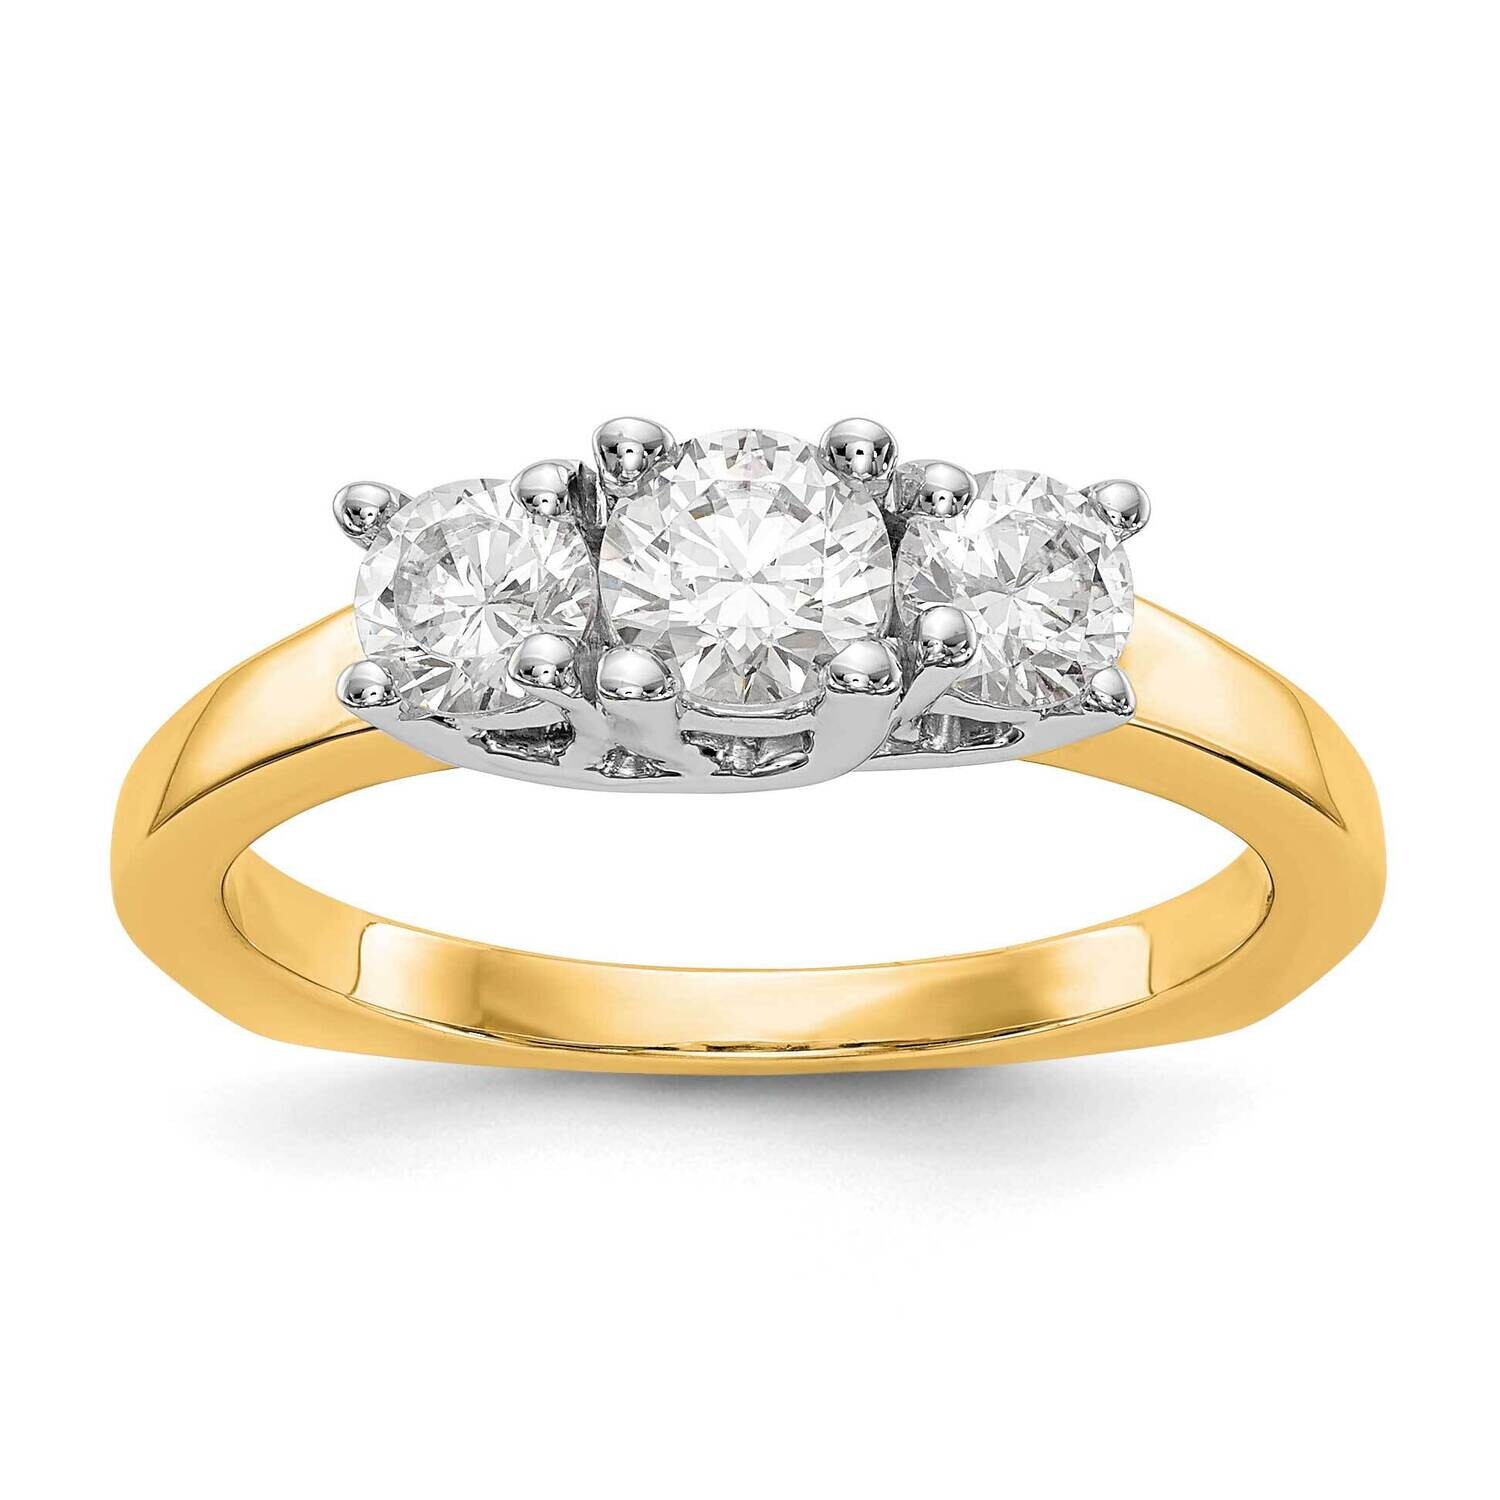 3-Stone Holds 1/2 Carat 4.7mm Round Center 2-4.00mm Round Sides Engagement Ring Mounting 14k White Gold RM2953E-050_050-YWAA